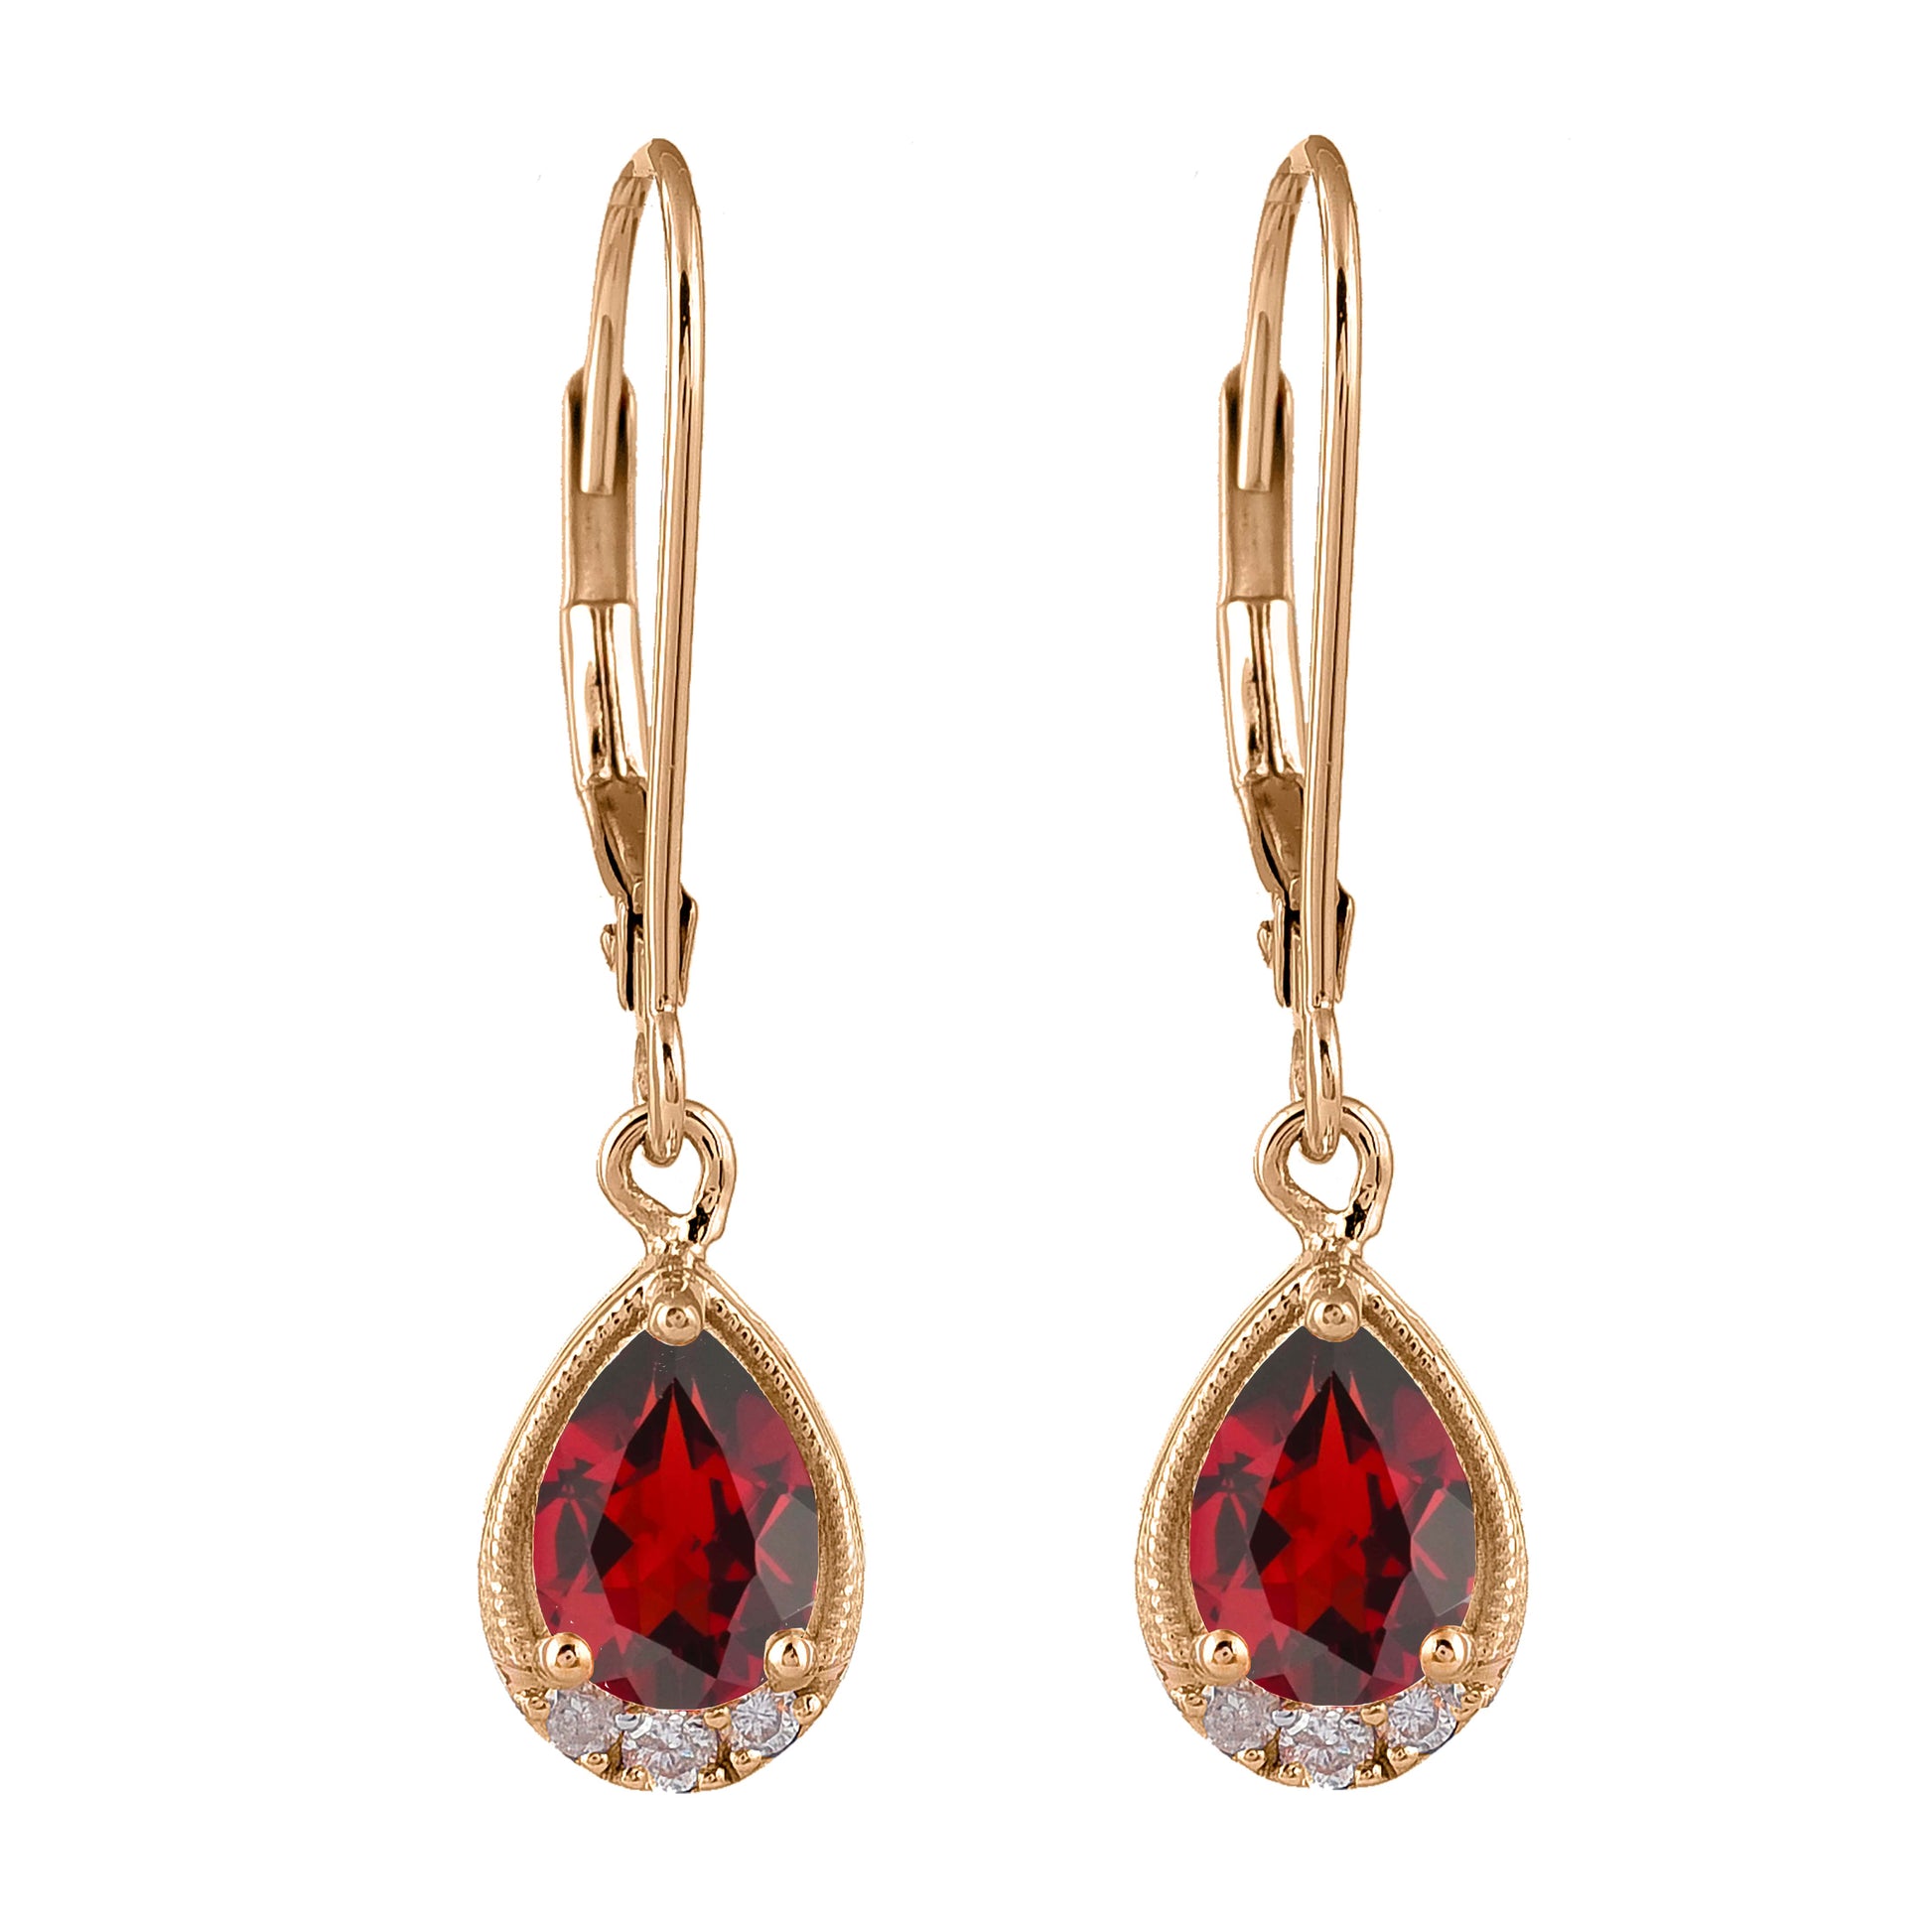 Upgrade Your Jewelry Collection with These Trendy Lever-back Earrings.